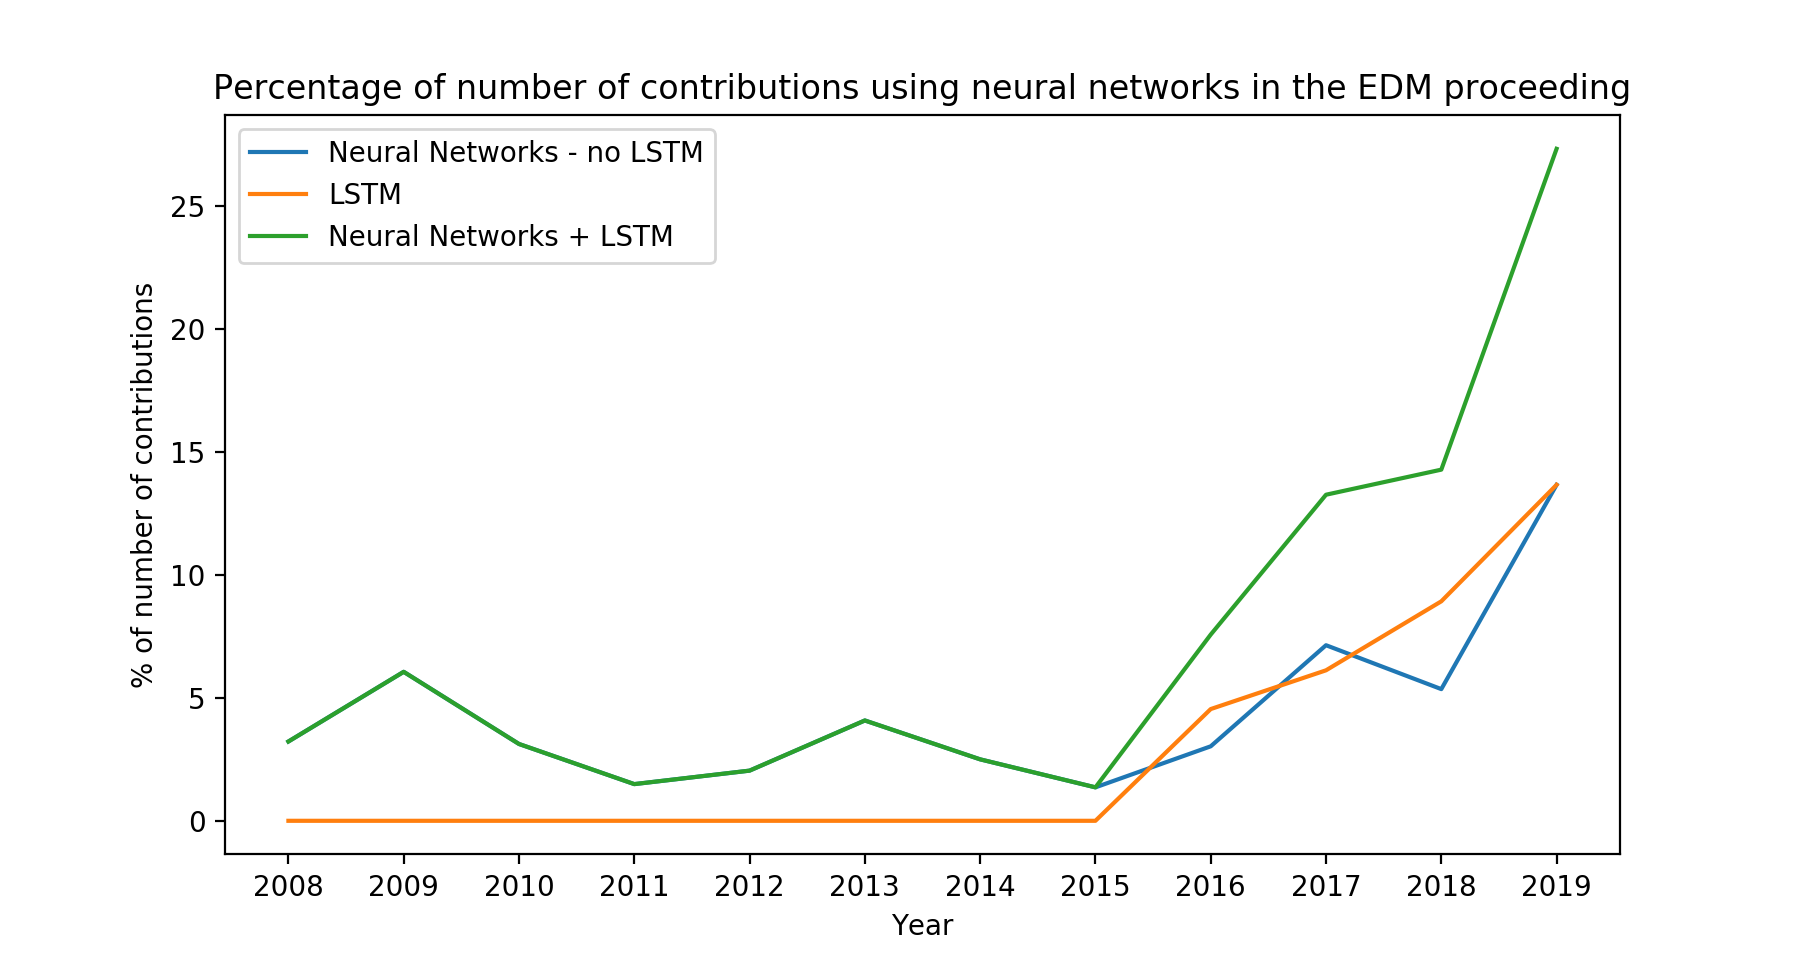 Evolution over the years of the percentage of contributions using neural networks in the EDM proceedings.